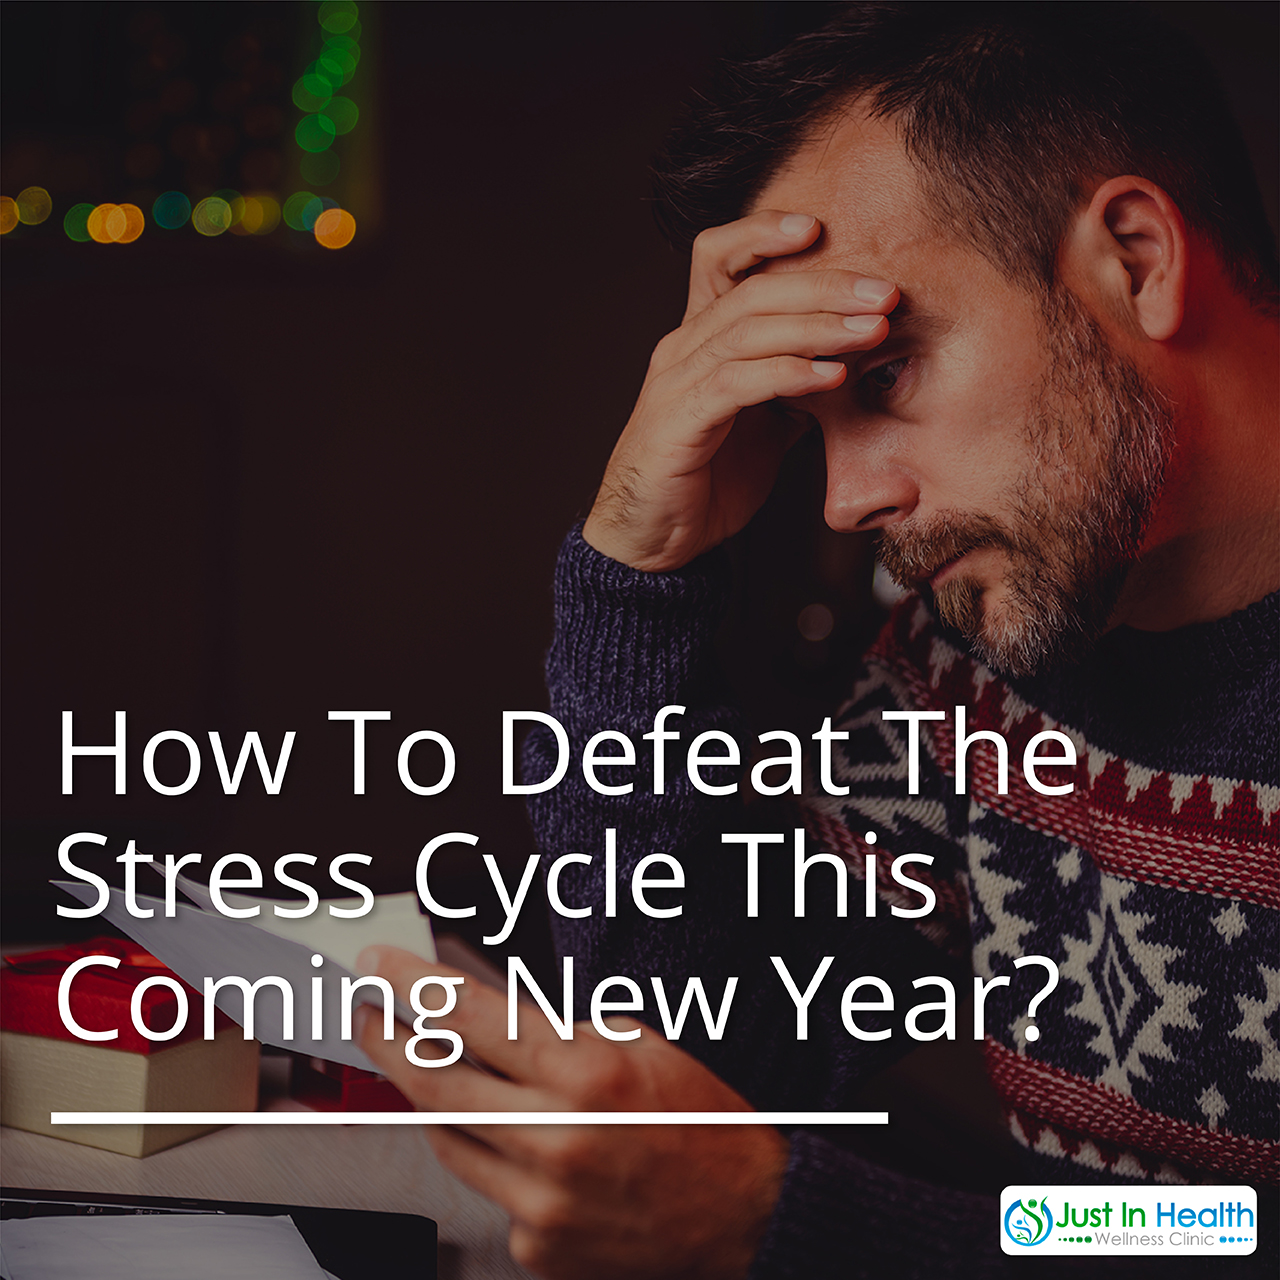 How To Defeat The Stress Cycle This Coming New Year